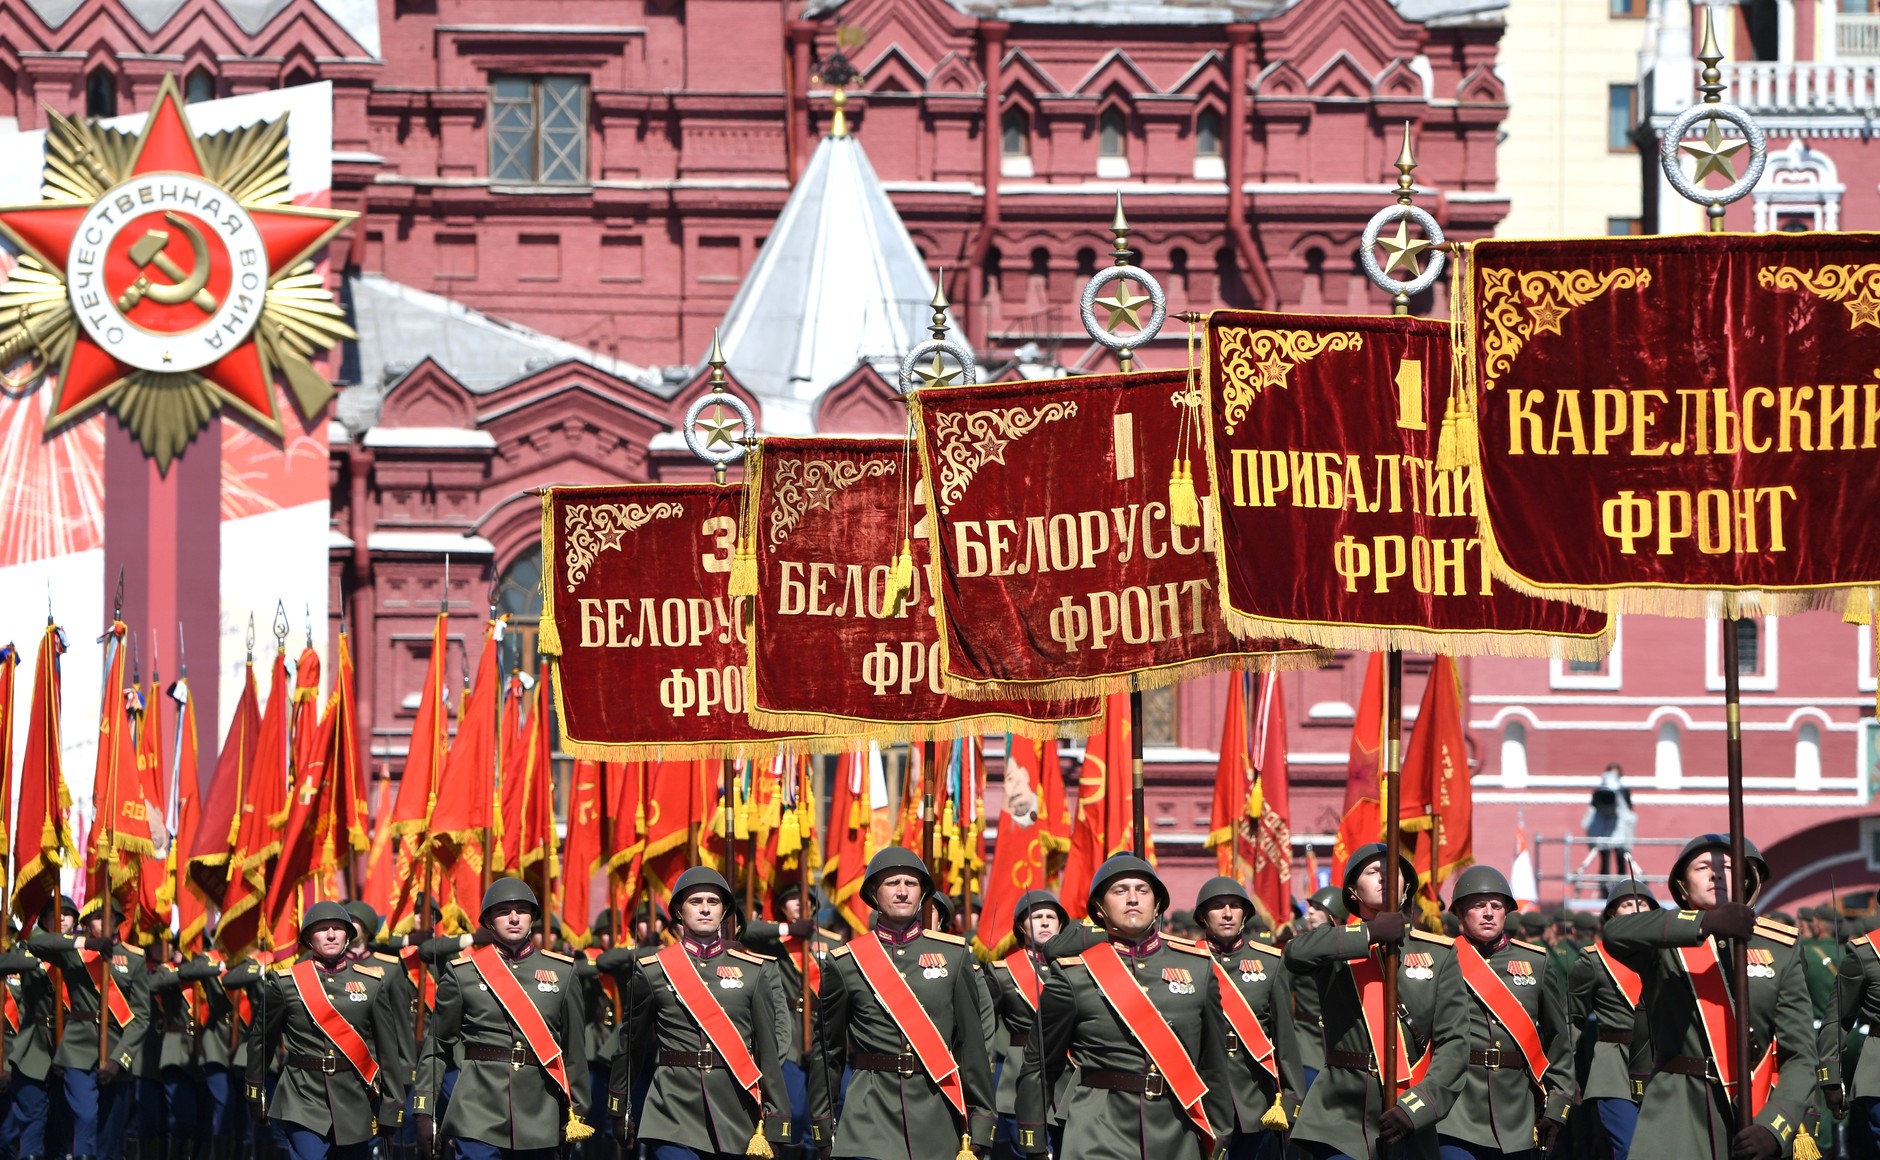 Men in WW2 uniforms at the 2020 Victory Day Parade.